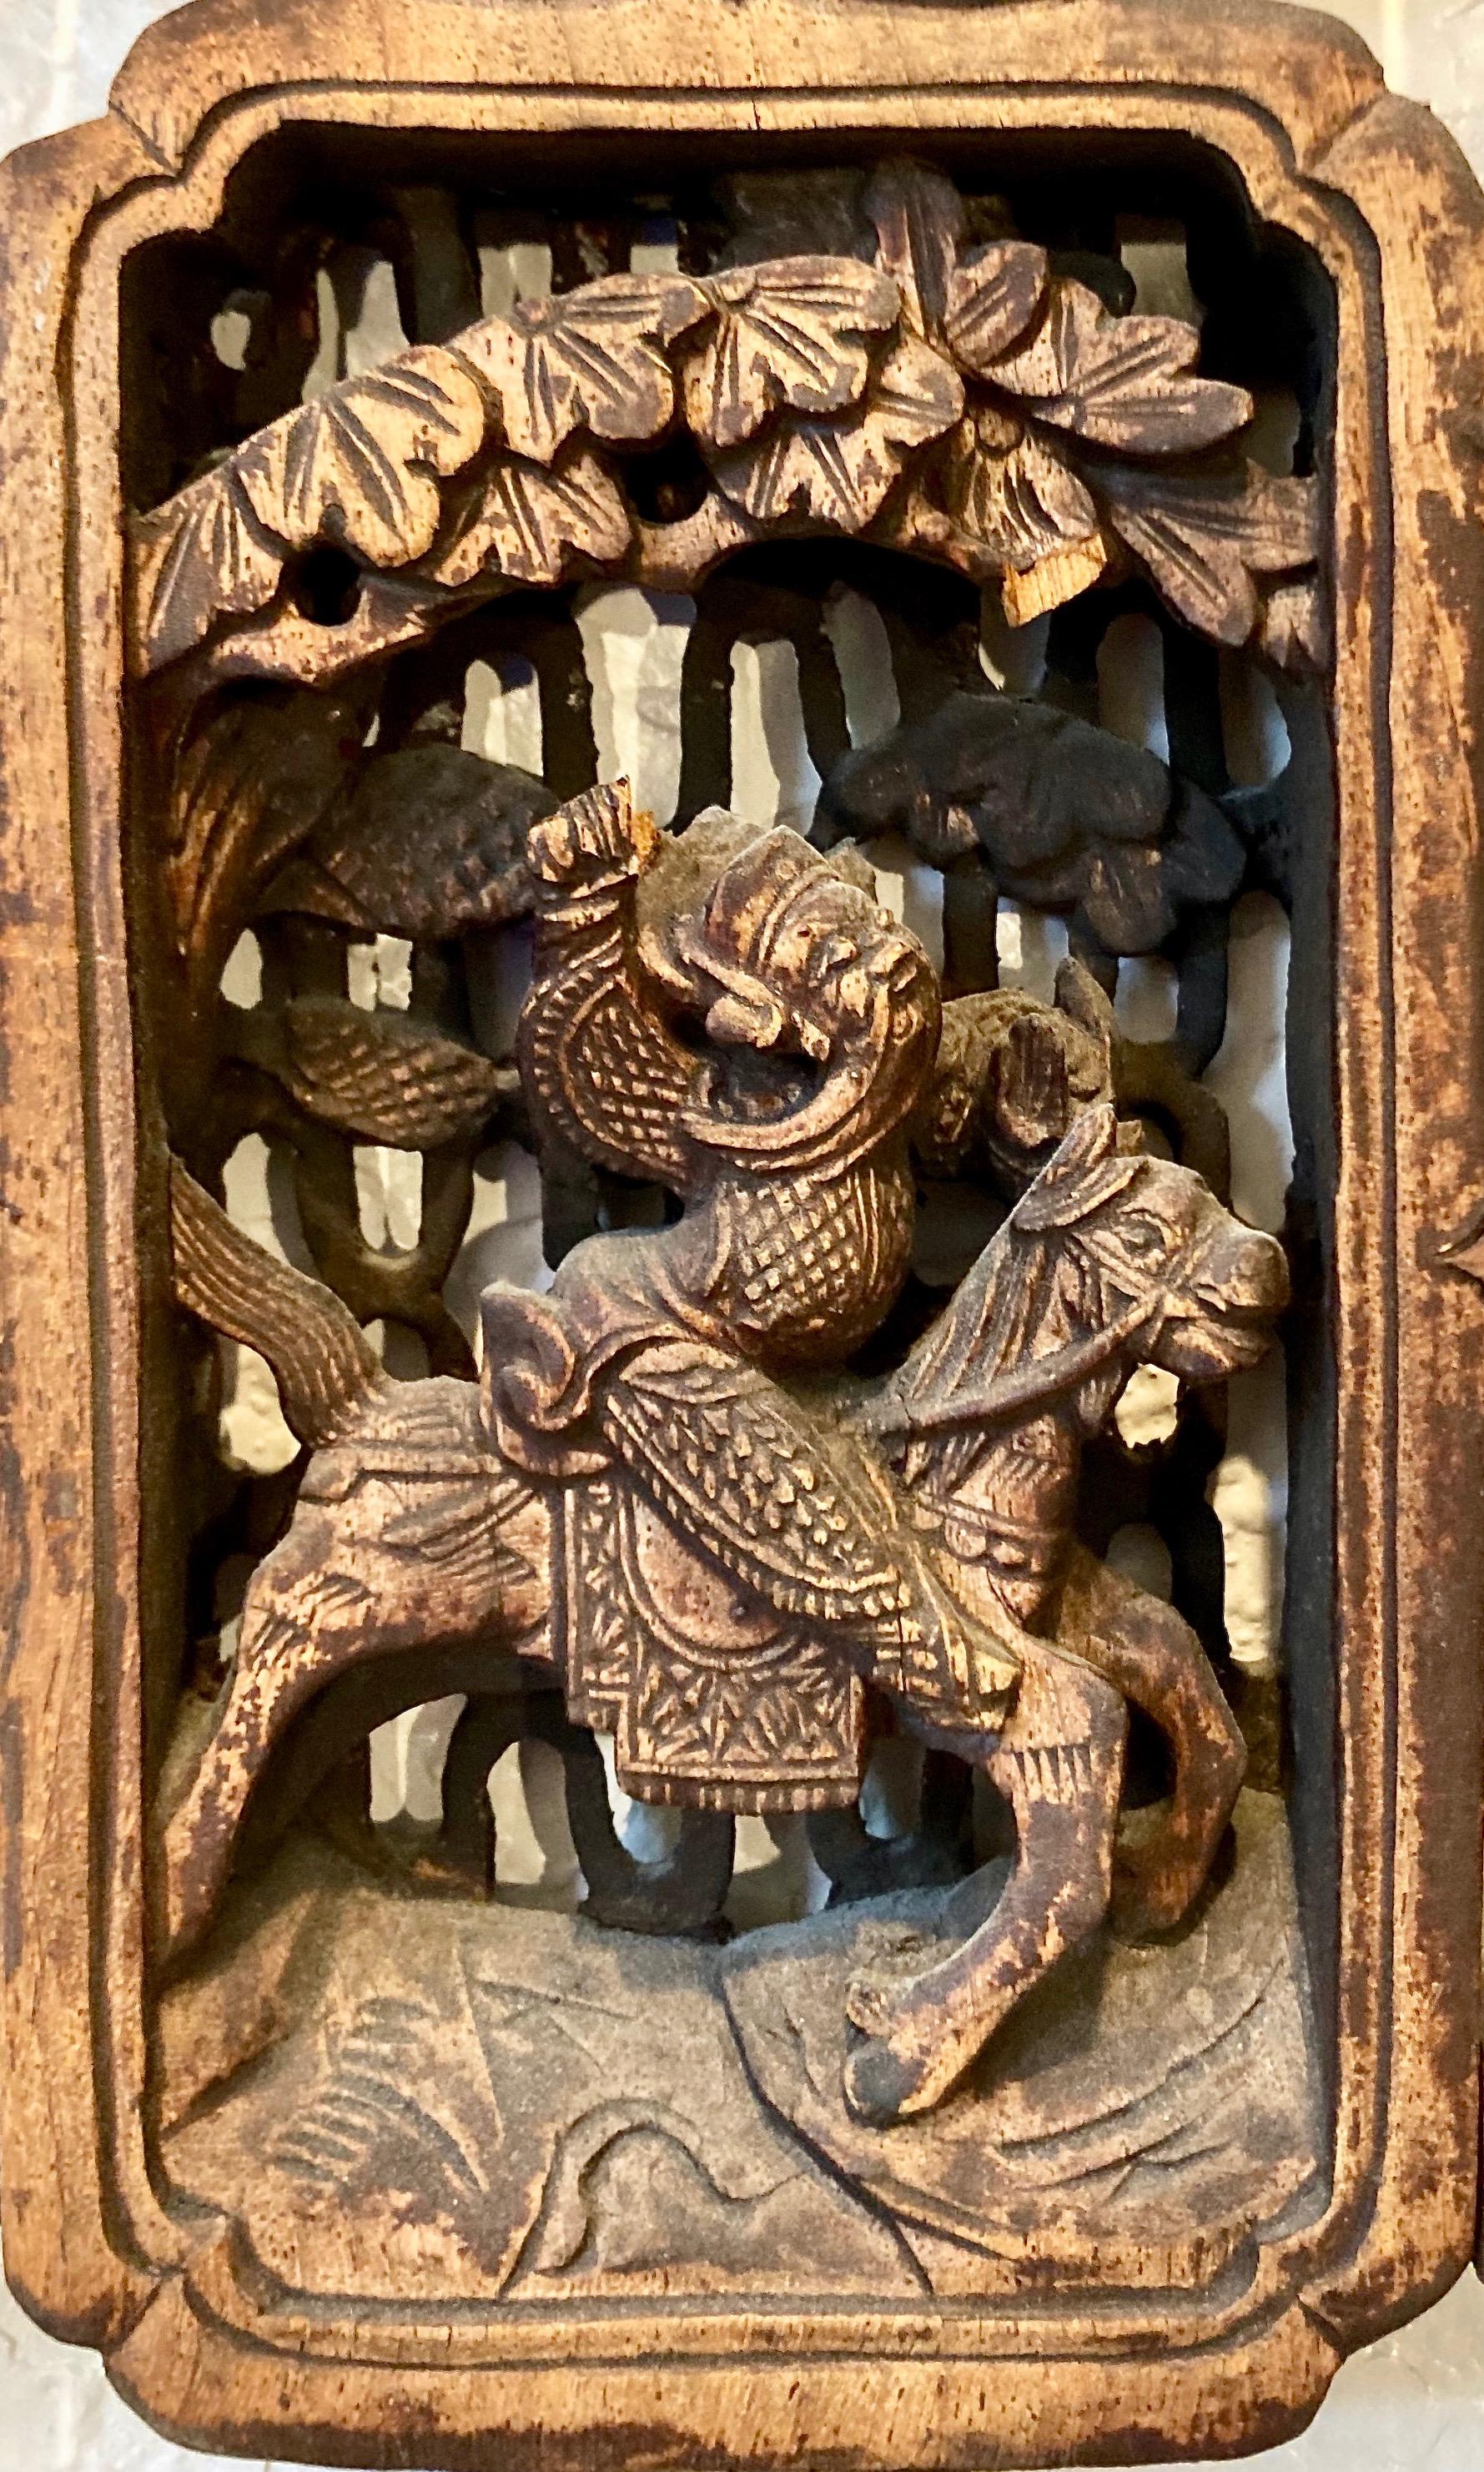 Lattice work panel with mortise + tenon joinery, and small symbolic carvings inset throughout. Rectangular center carving with horse and rider motif.